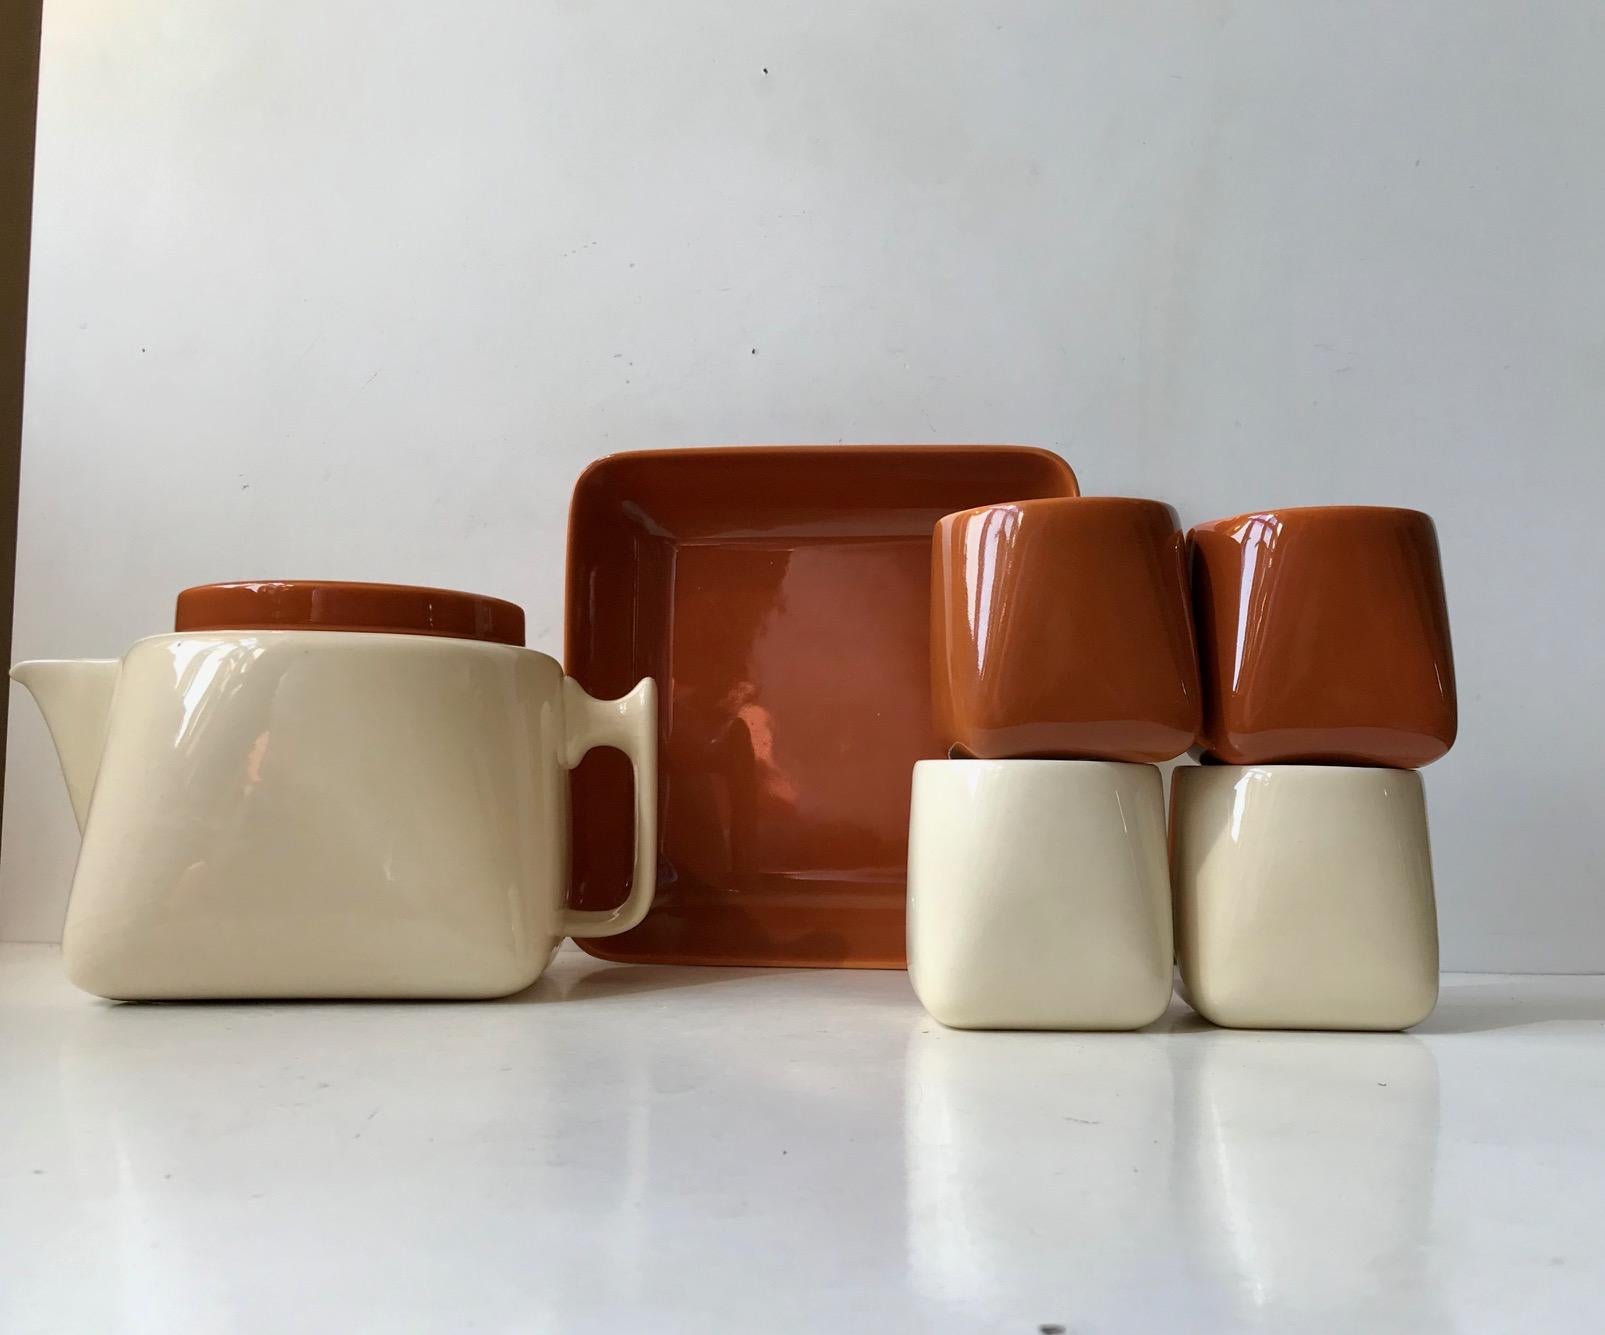 A rare tea service consisting of a teapot, cookie bowl and 4 cups. The shape starts of as a square at the bottom and transform fluently into a circle at the top. All pieces features monochrome glazes in burnt/caramel orange and creme pastel. This